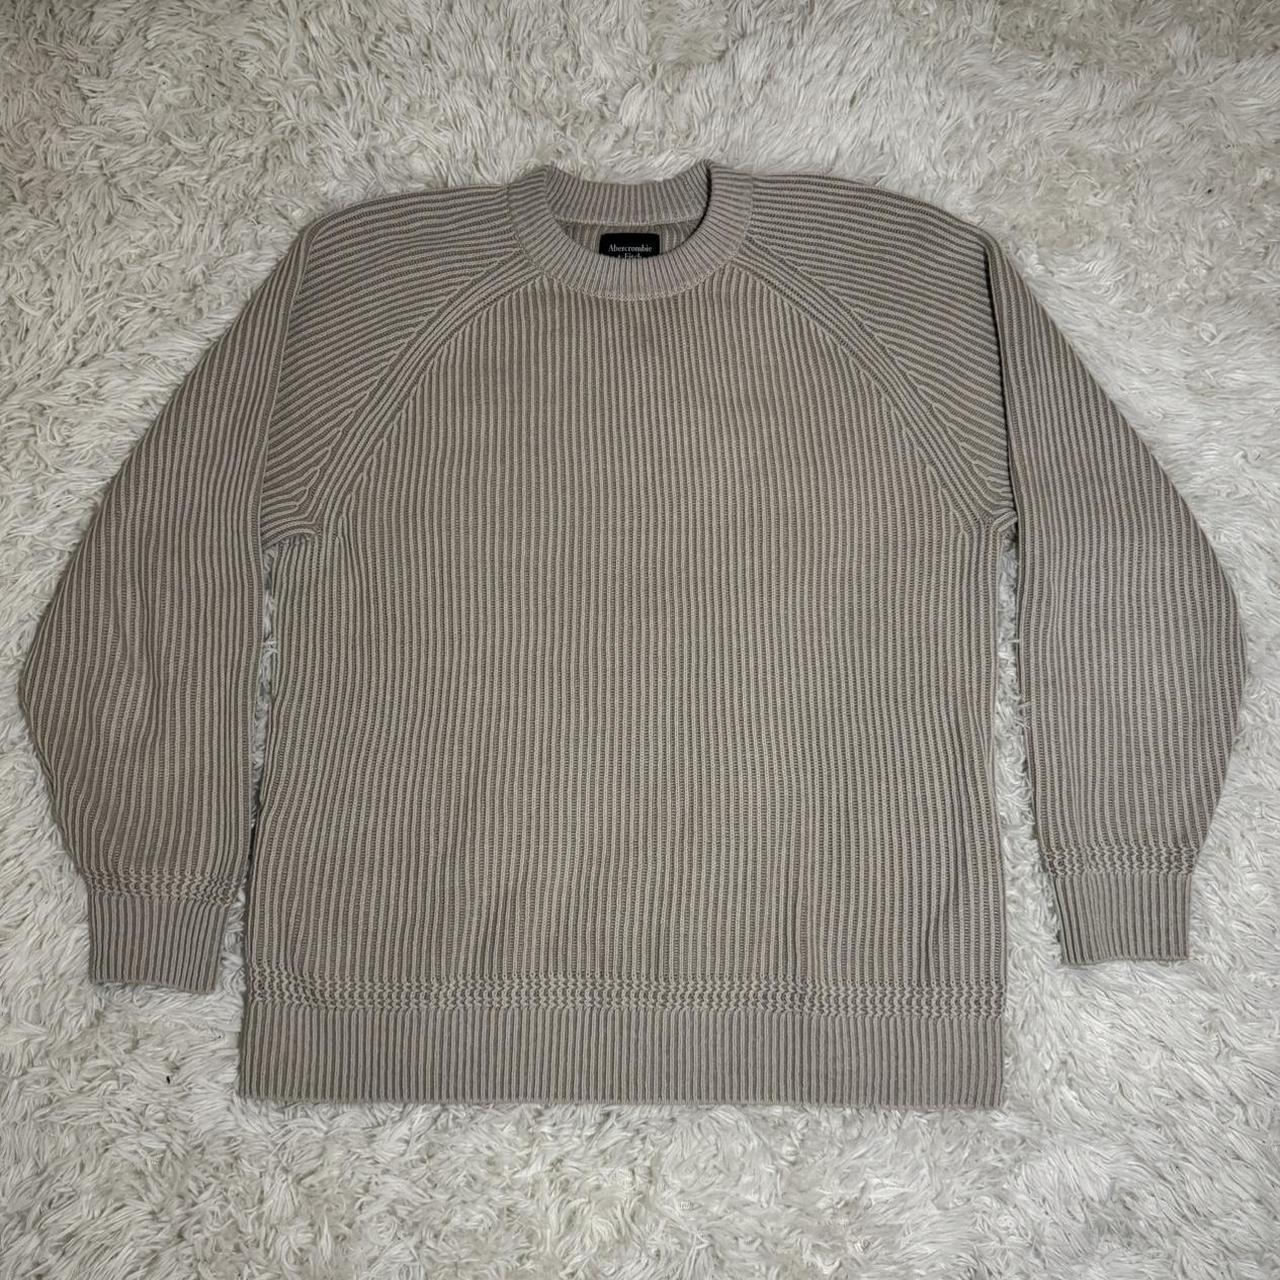 Abercrombie & Fitch Knitted Sweater #abercrombie... - Depop